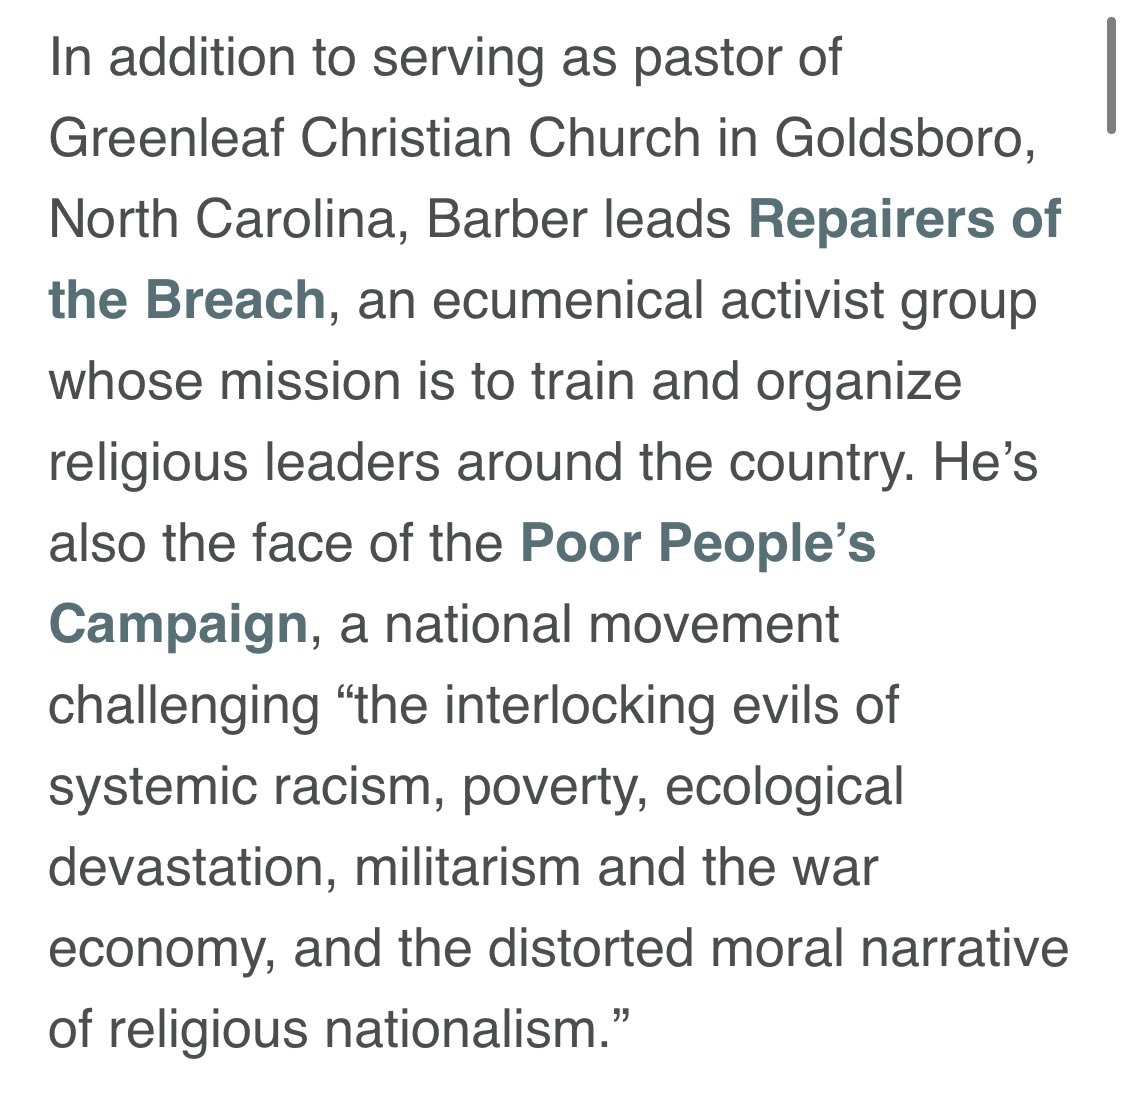 9. And as they began occupying more space in liberal circles, faith activists also increasingly framed themselves as a counterbalance to another movement: Christian nationalism.In fact, leaders like Rev. William Barber began listing it as one of America’s “interlocking evils.”